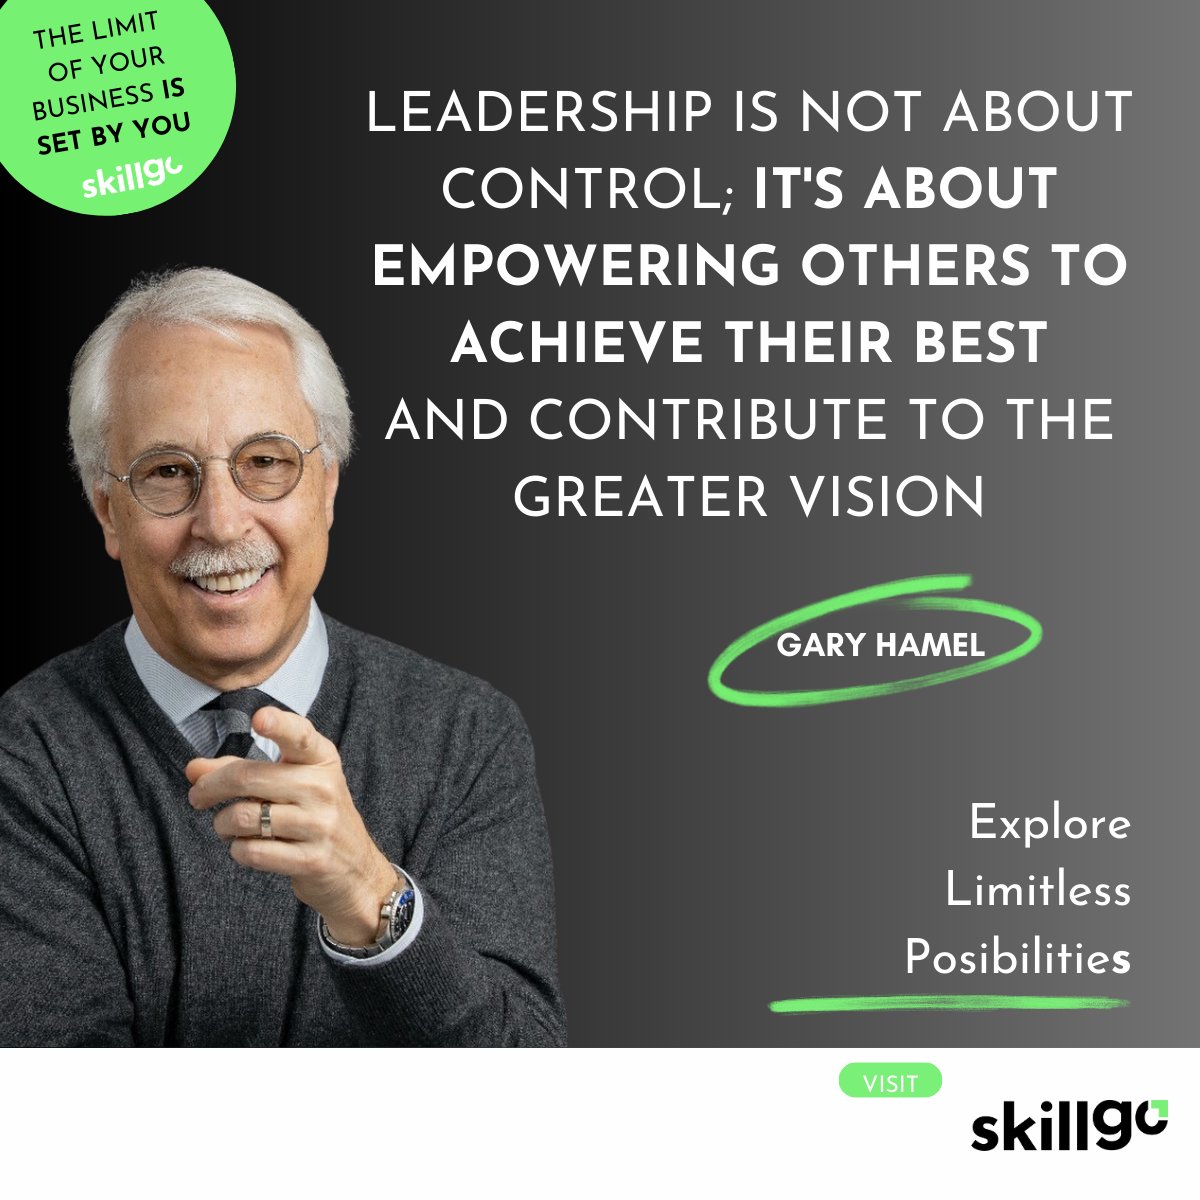 🌟 Mastermind Minds: Learn from Gary Hamel, a leader empowering others for a greater vision. How does this redefine your approach? Share empowering experiences and your favorite leadership books below! 📚✨ 

#MastermindMinds #GaryHamel #EmpowerLeadership #BookRecs #Skillgo